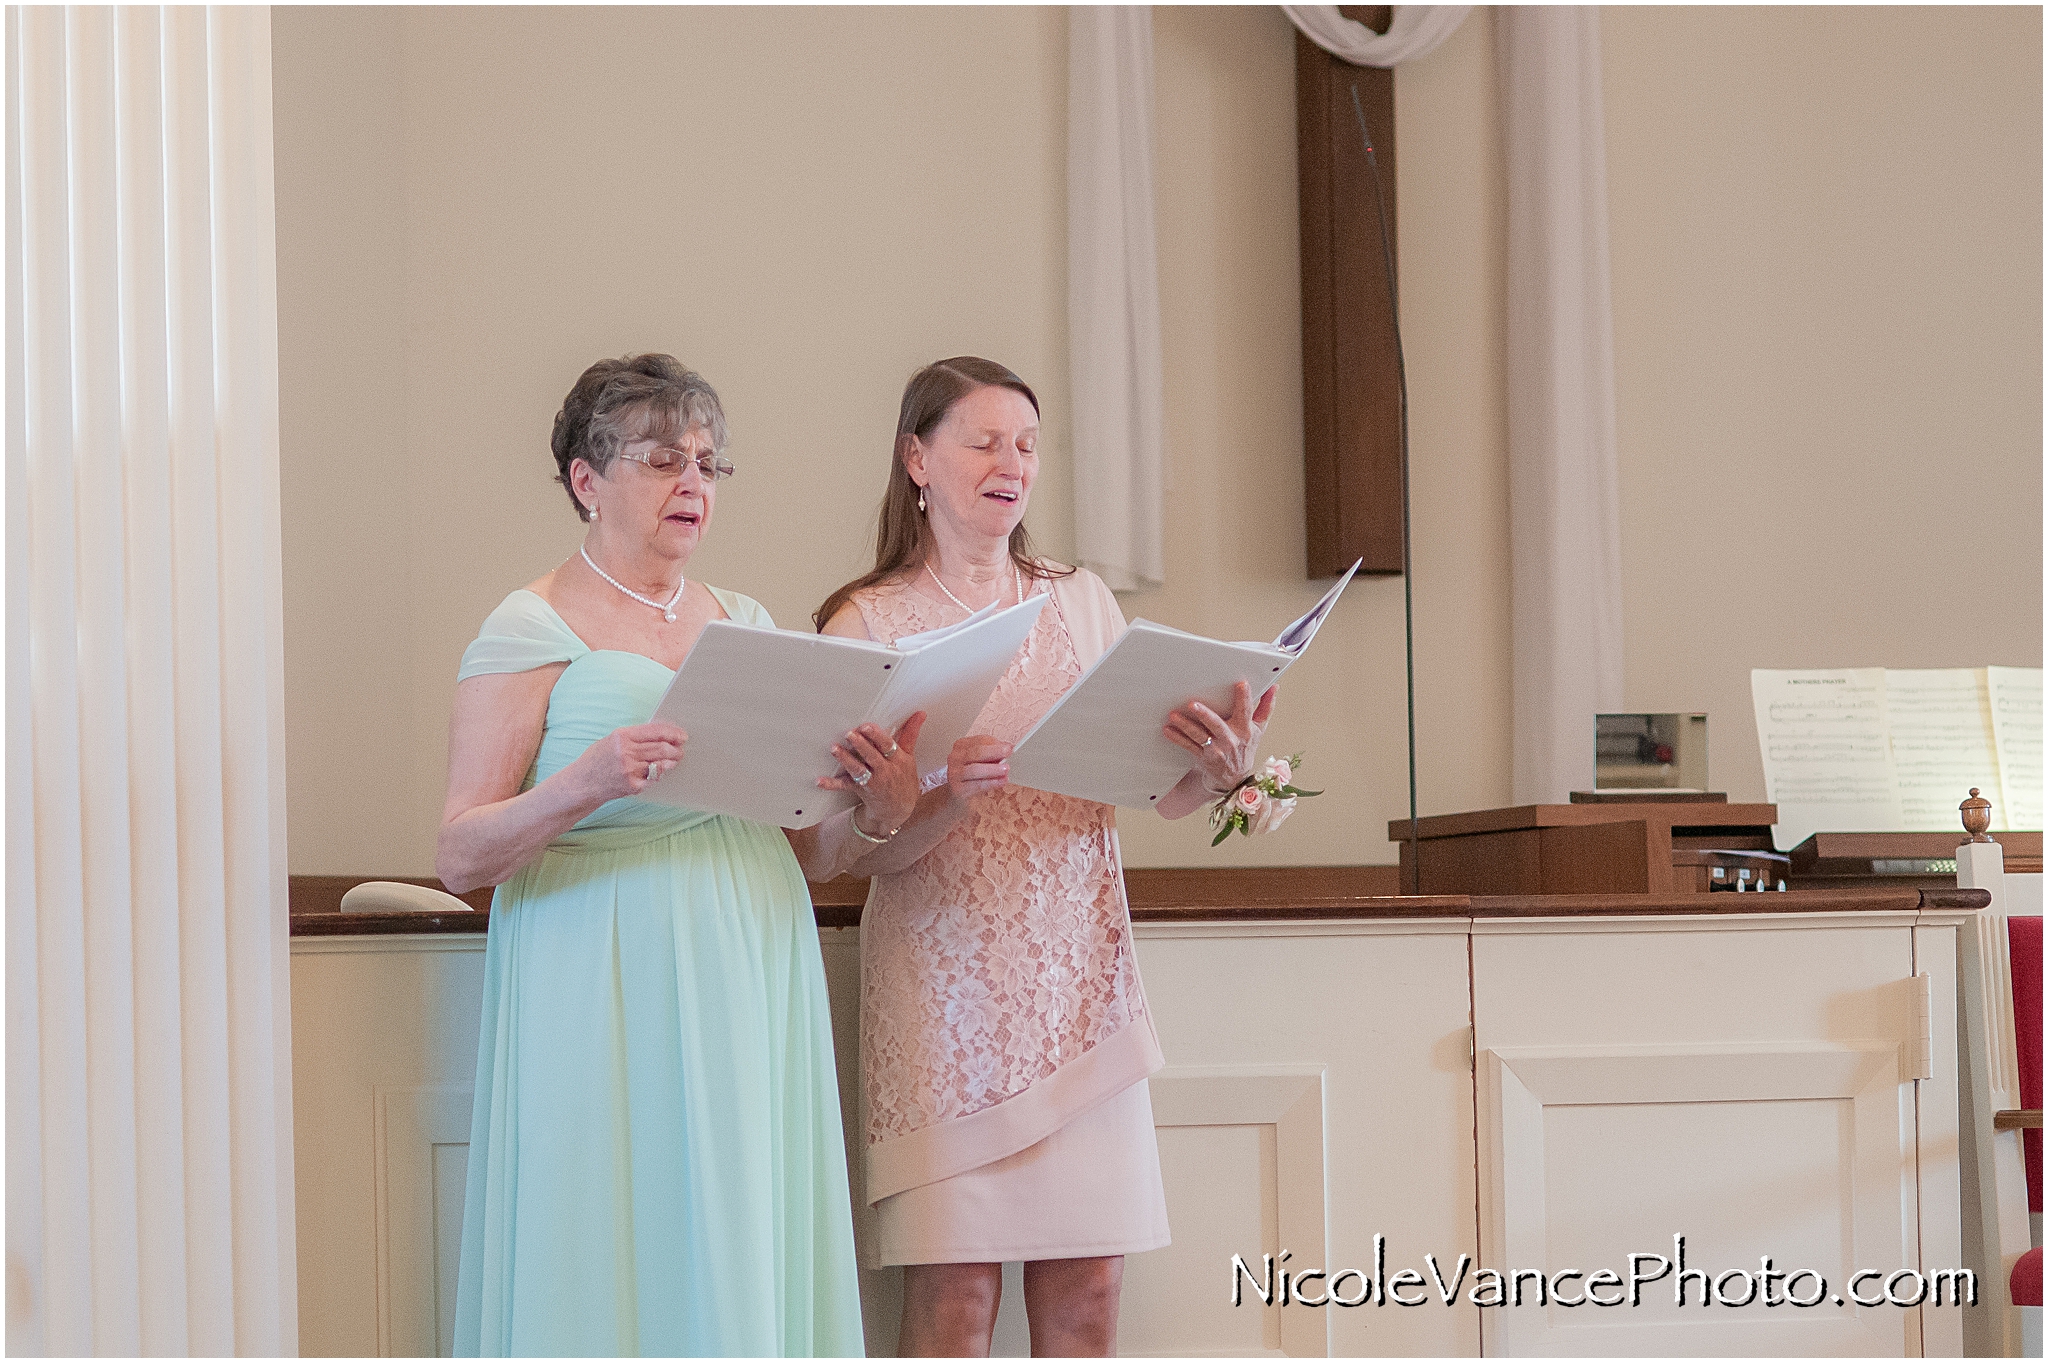 Family members perform a hymn at the wedding ceremony at Crestwood Presbyterian Church in Richmond VA